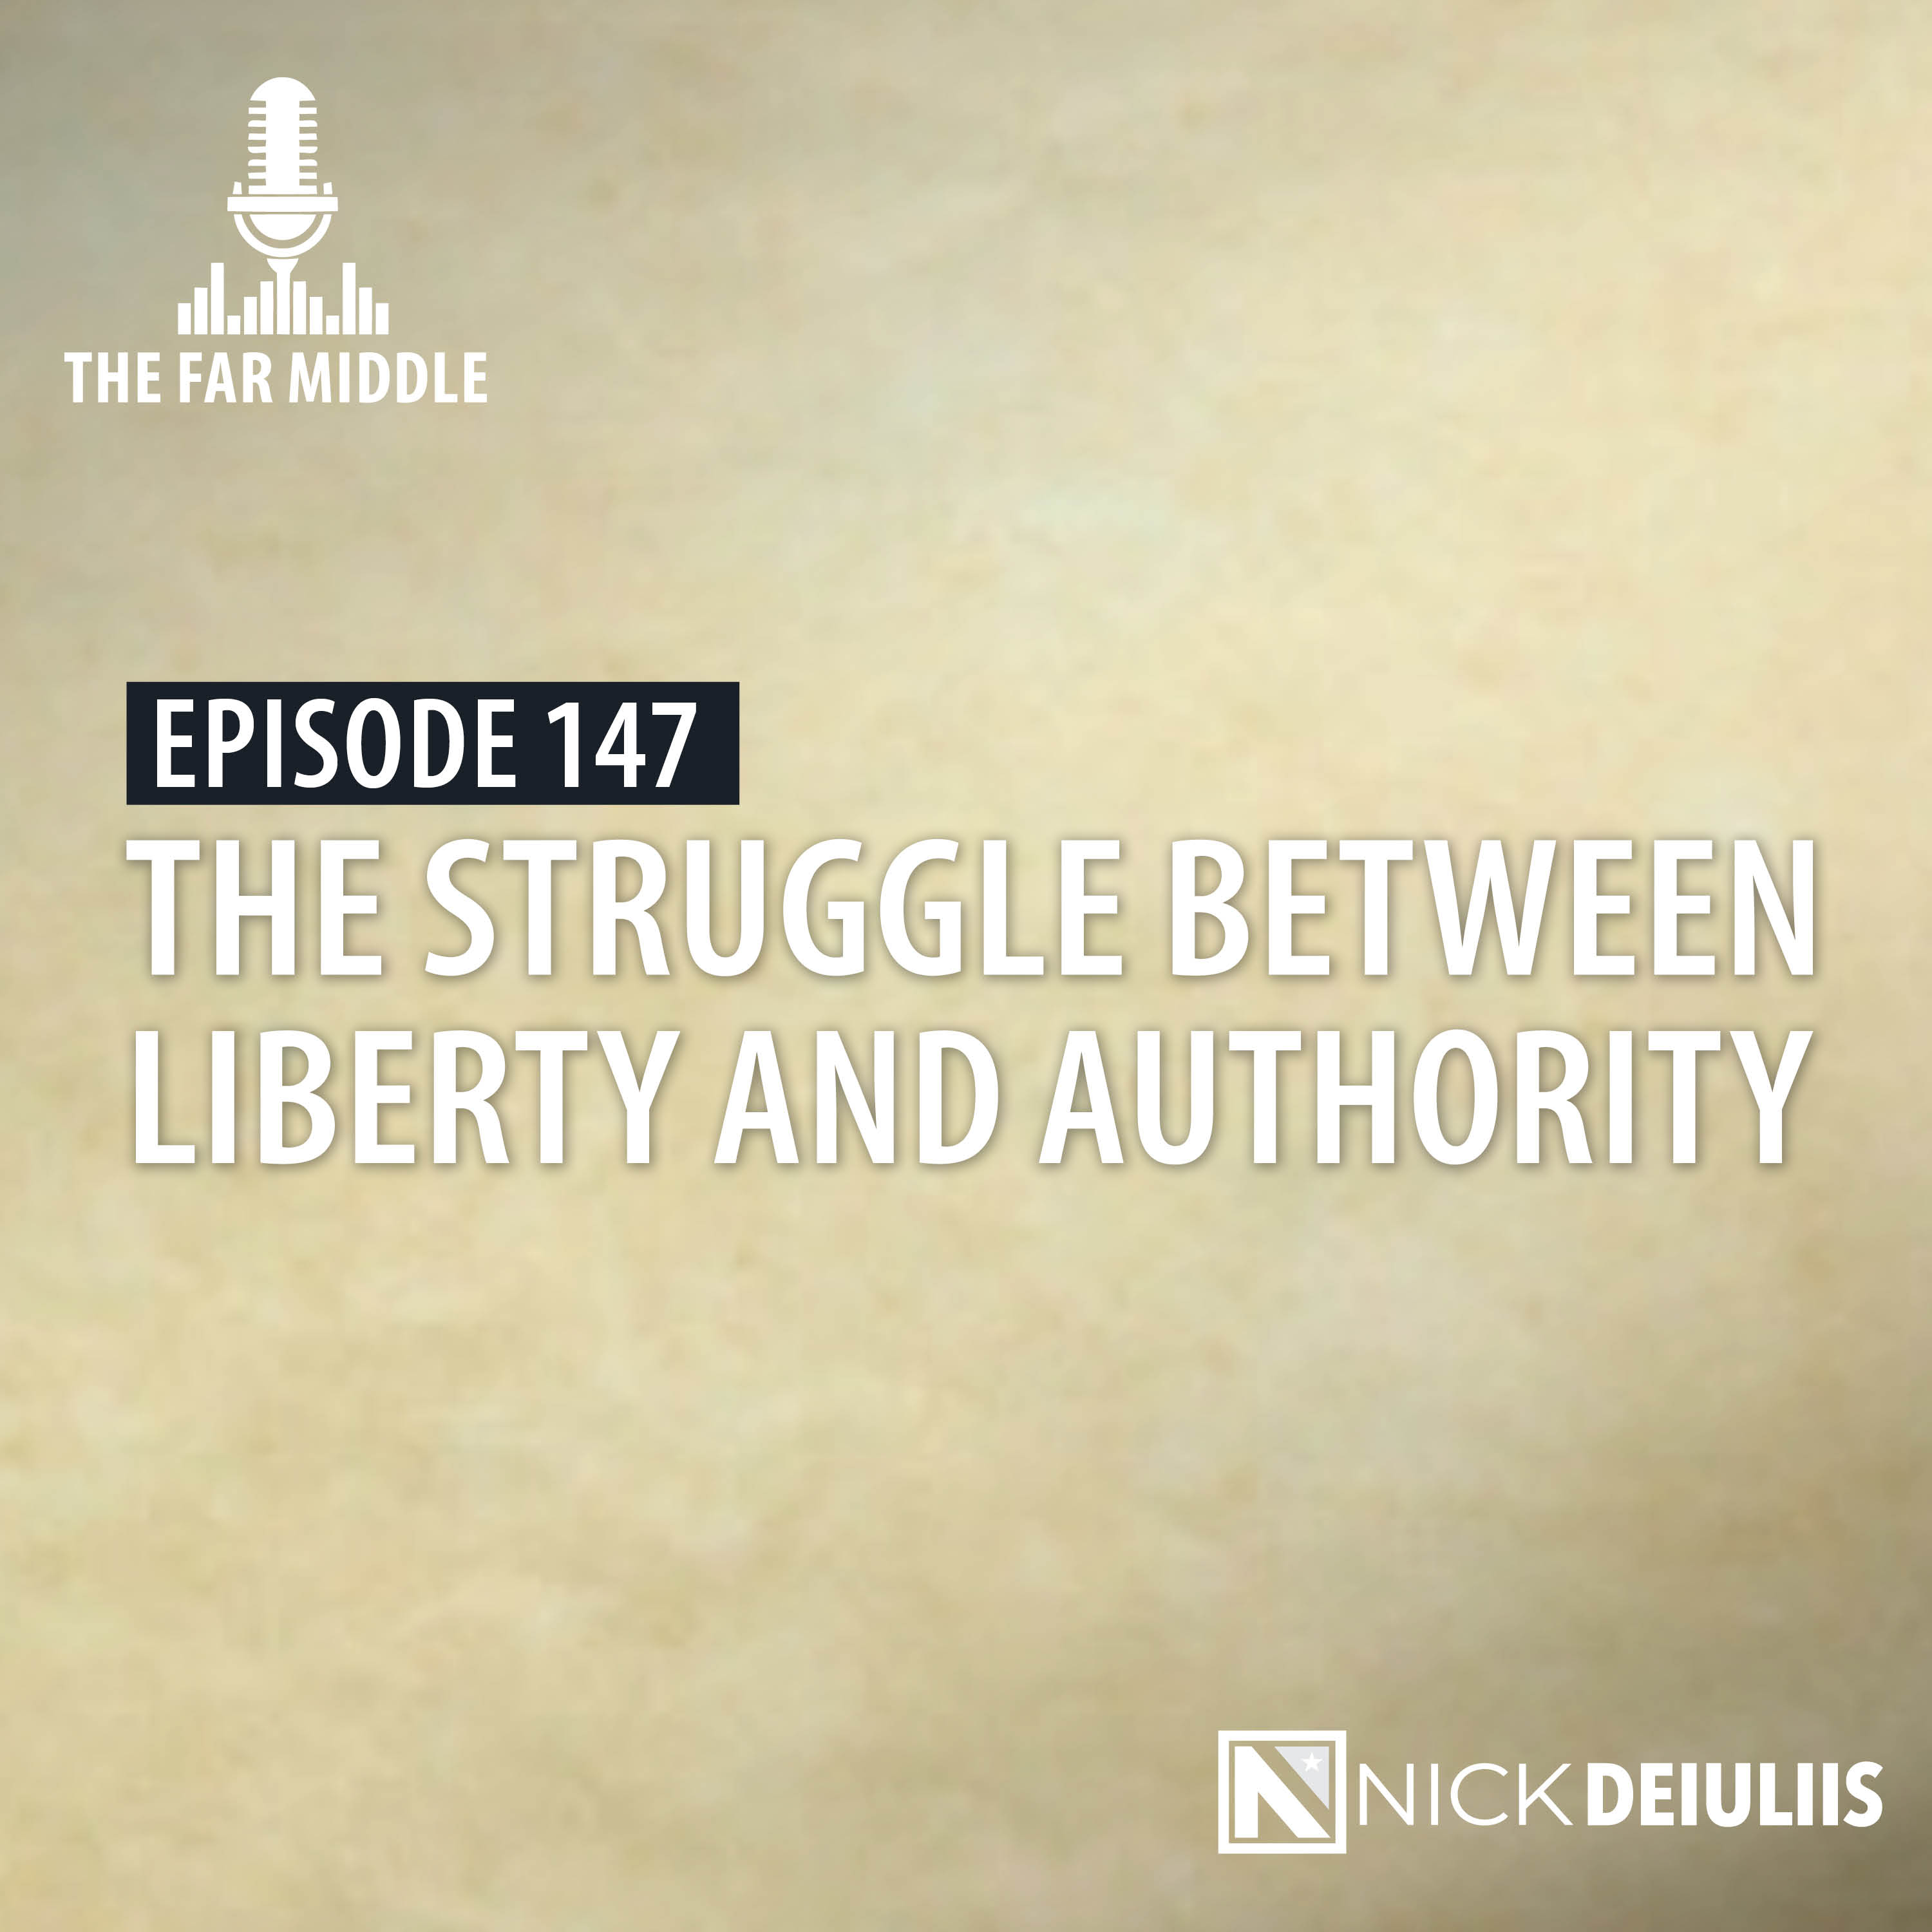 The Struggle Between Liberty and Authority